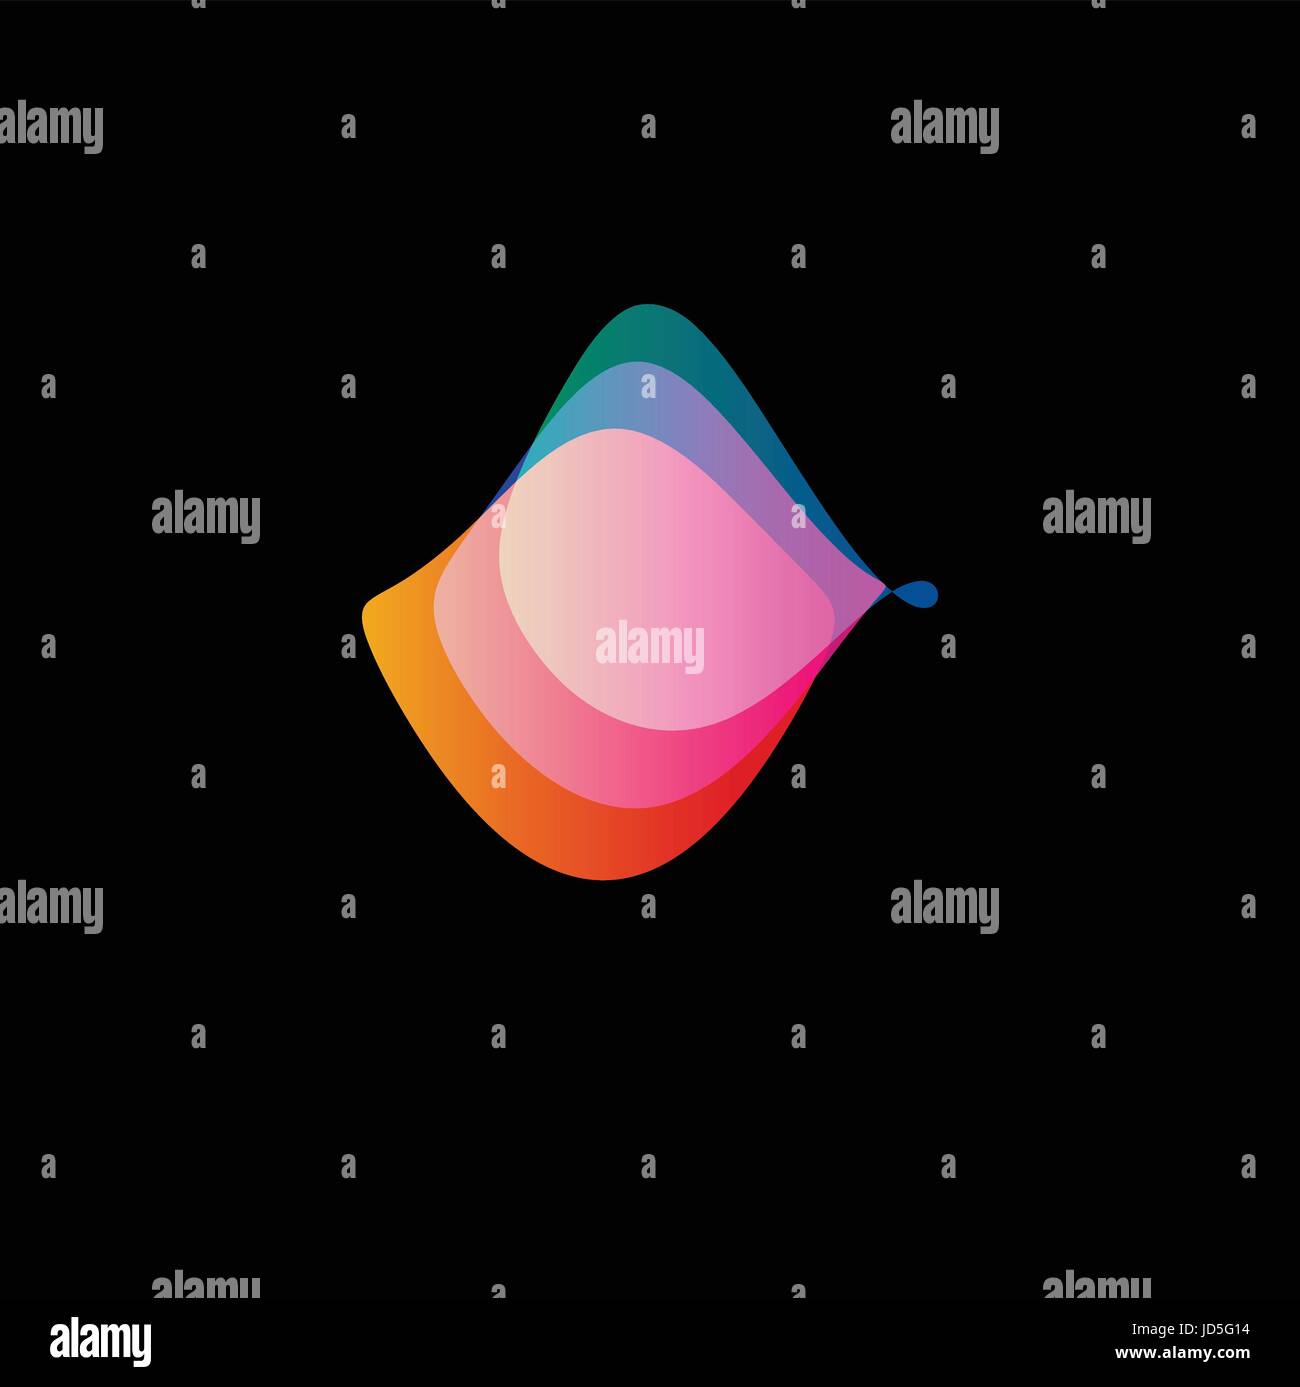 Wavy abstract vector logo. Smooth gradients and colorful cosmic and high technology oval shapes Stock Vector